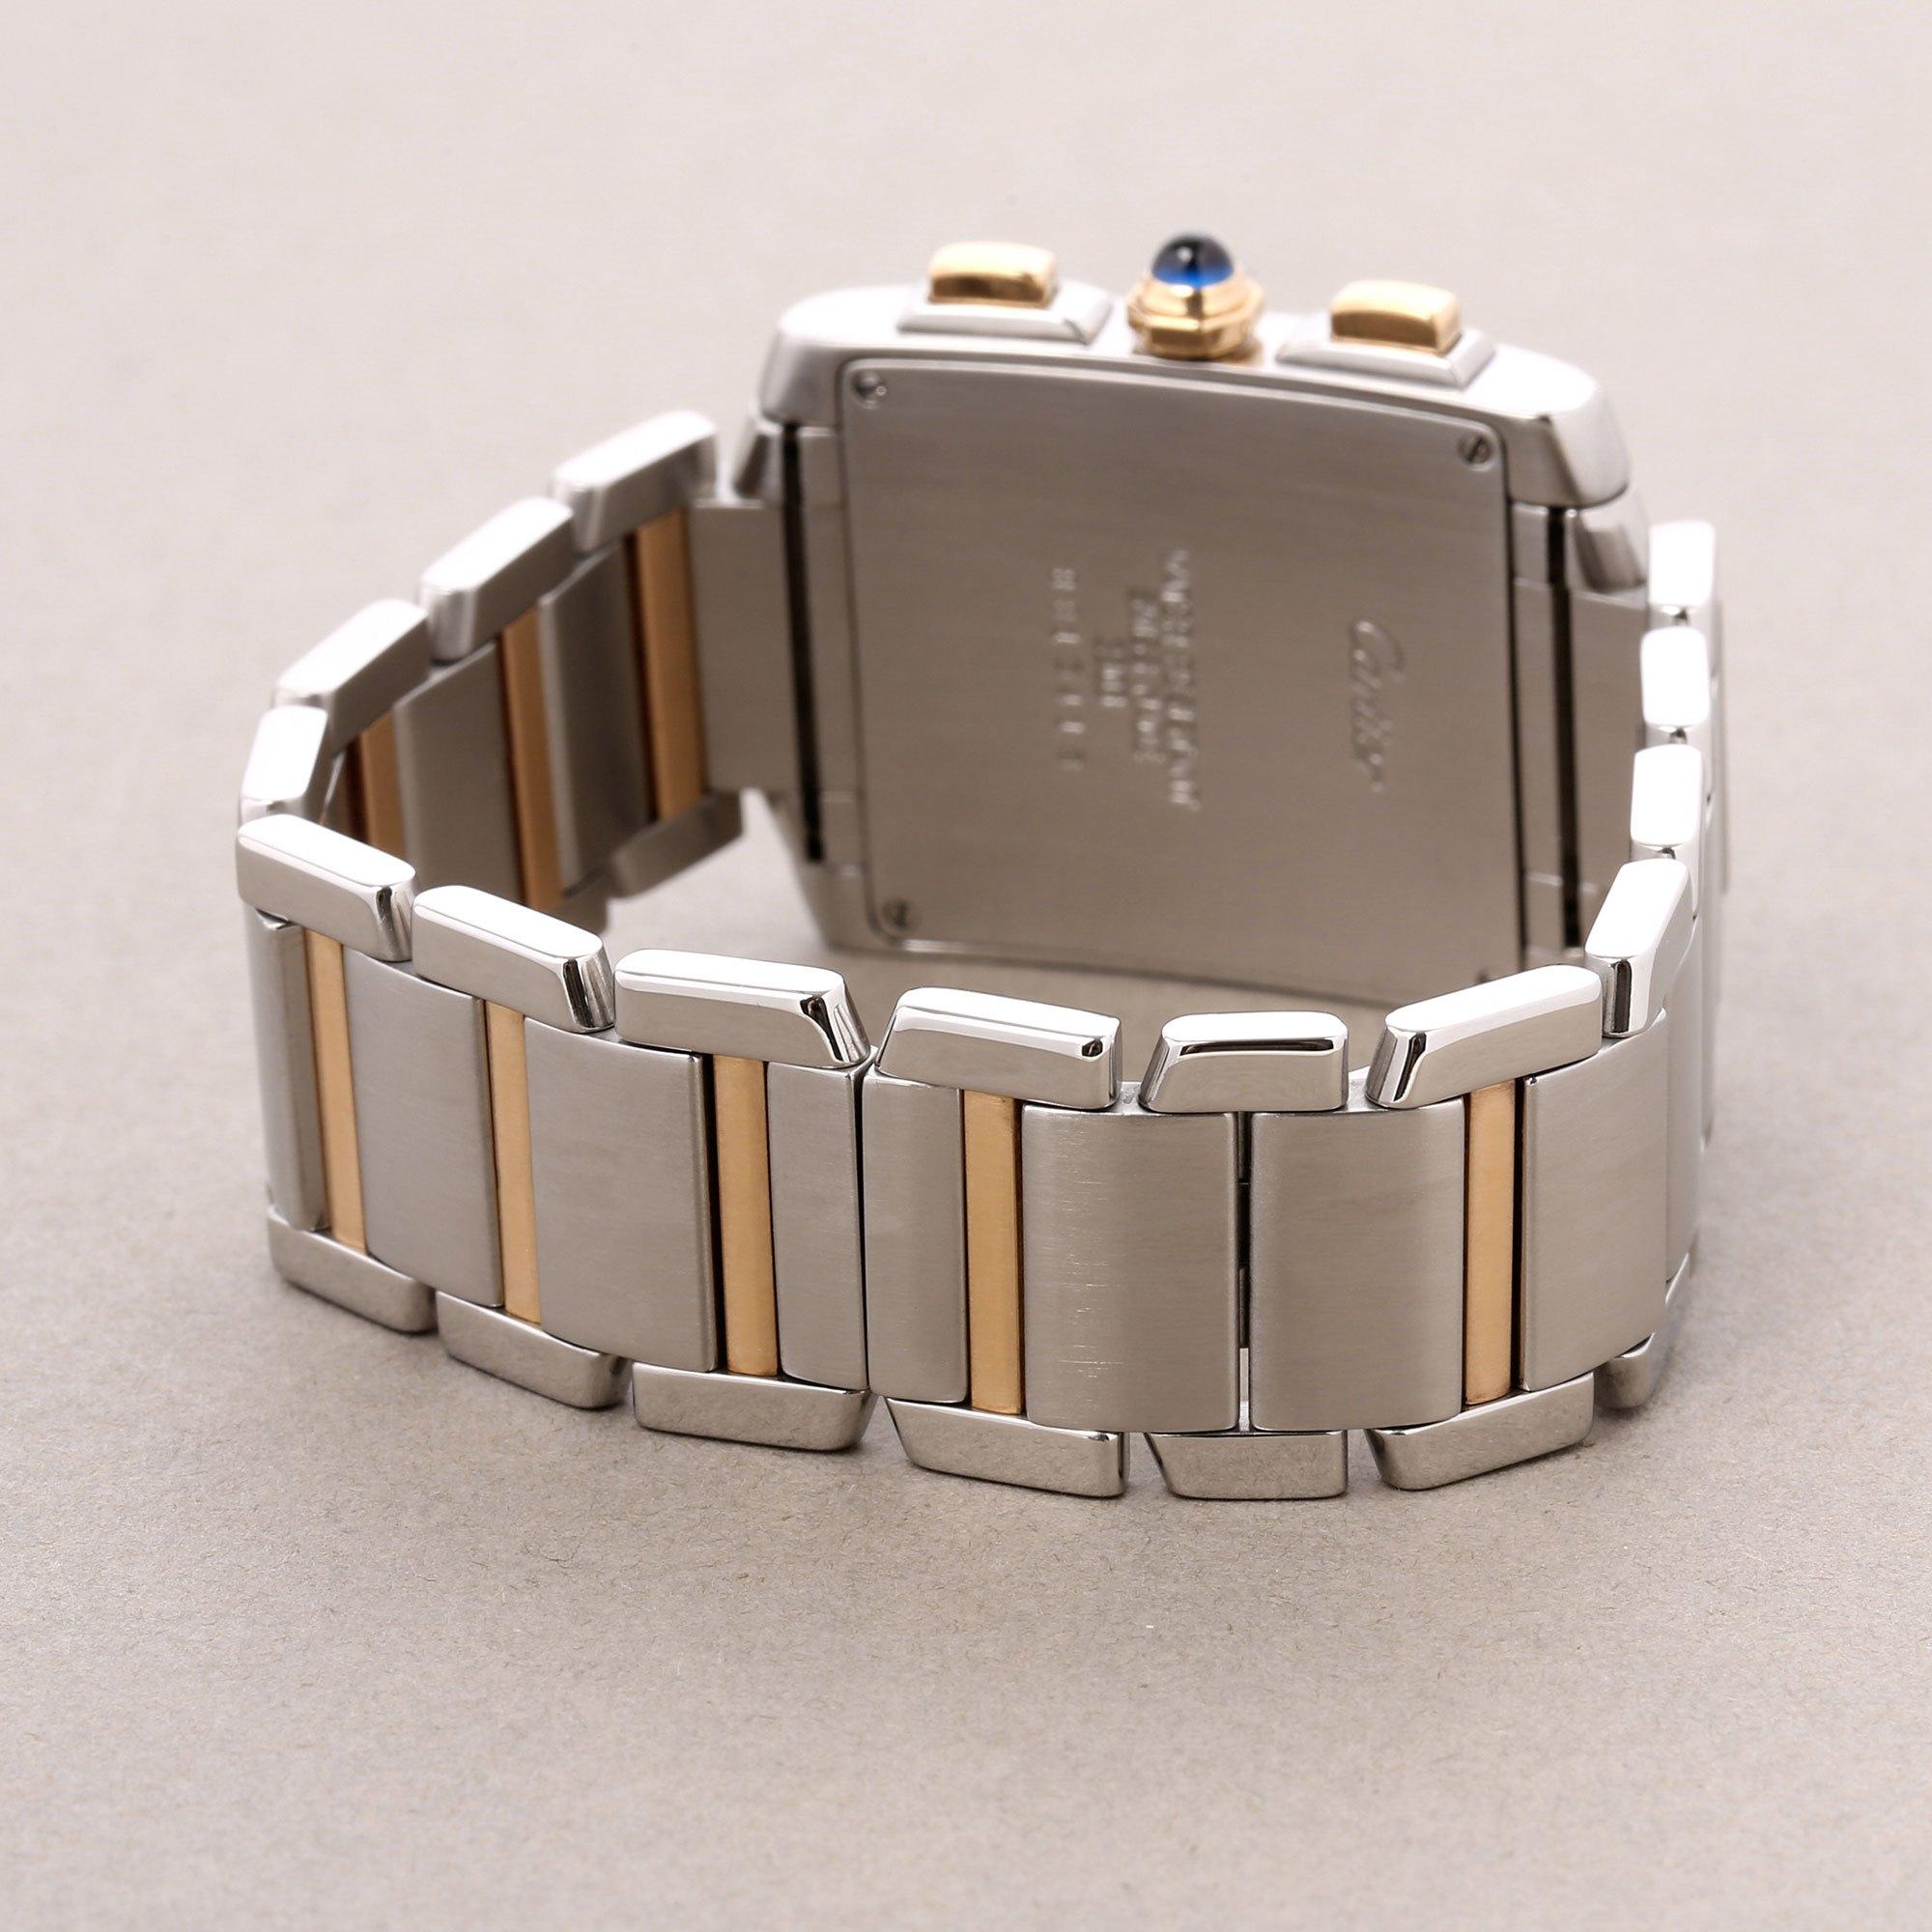 Cartier Tank Francaise W51004Q4 or 2303 Unisex Stainless Steel and Yellow Gold 4